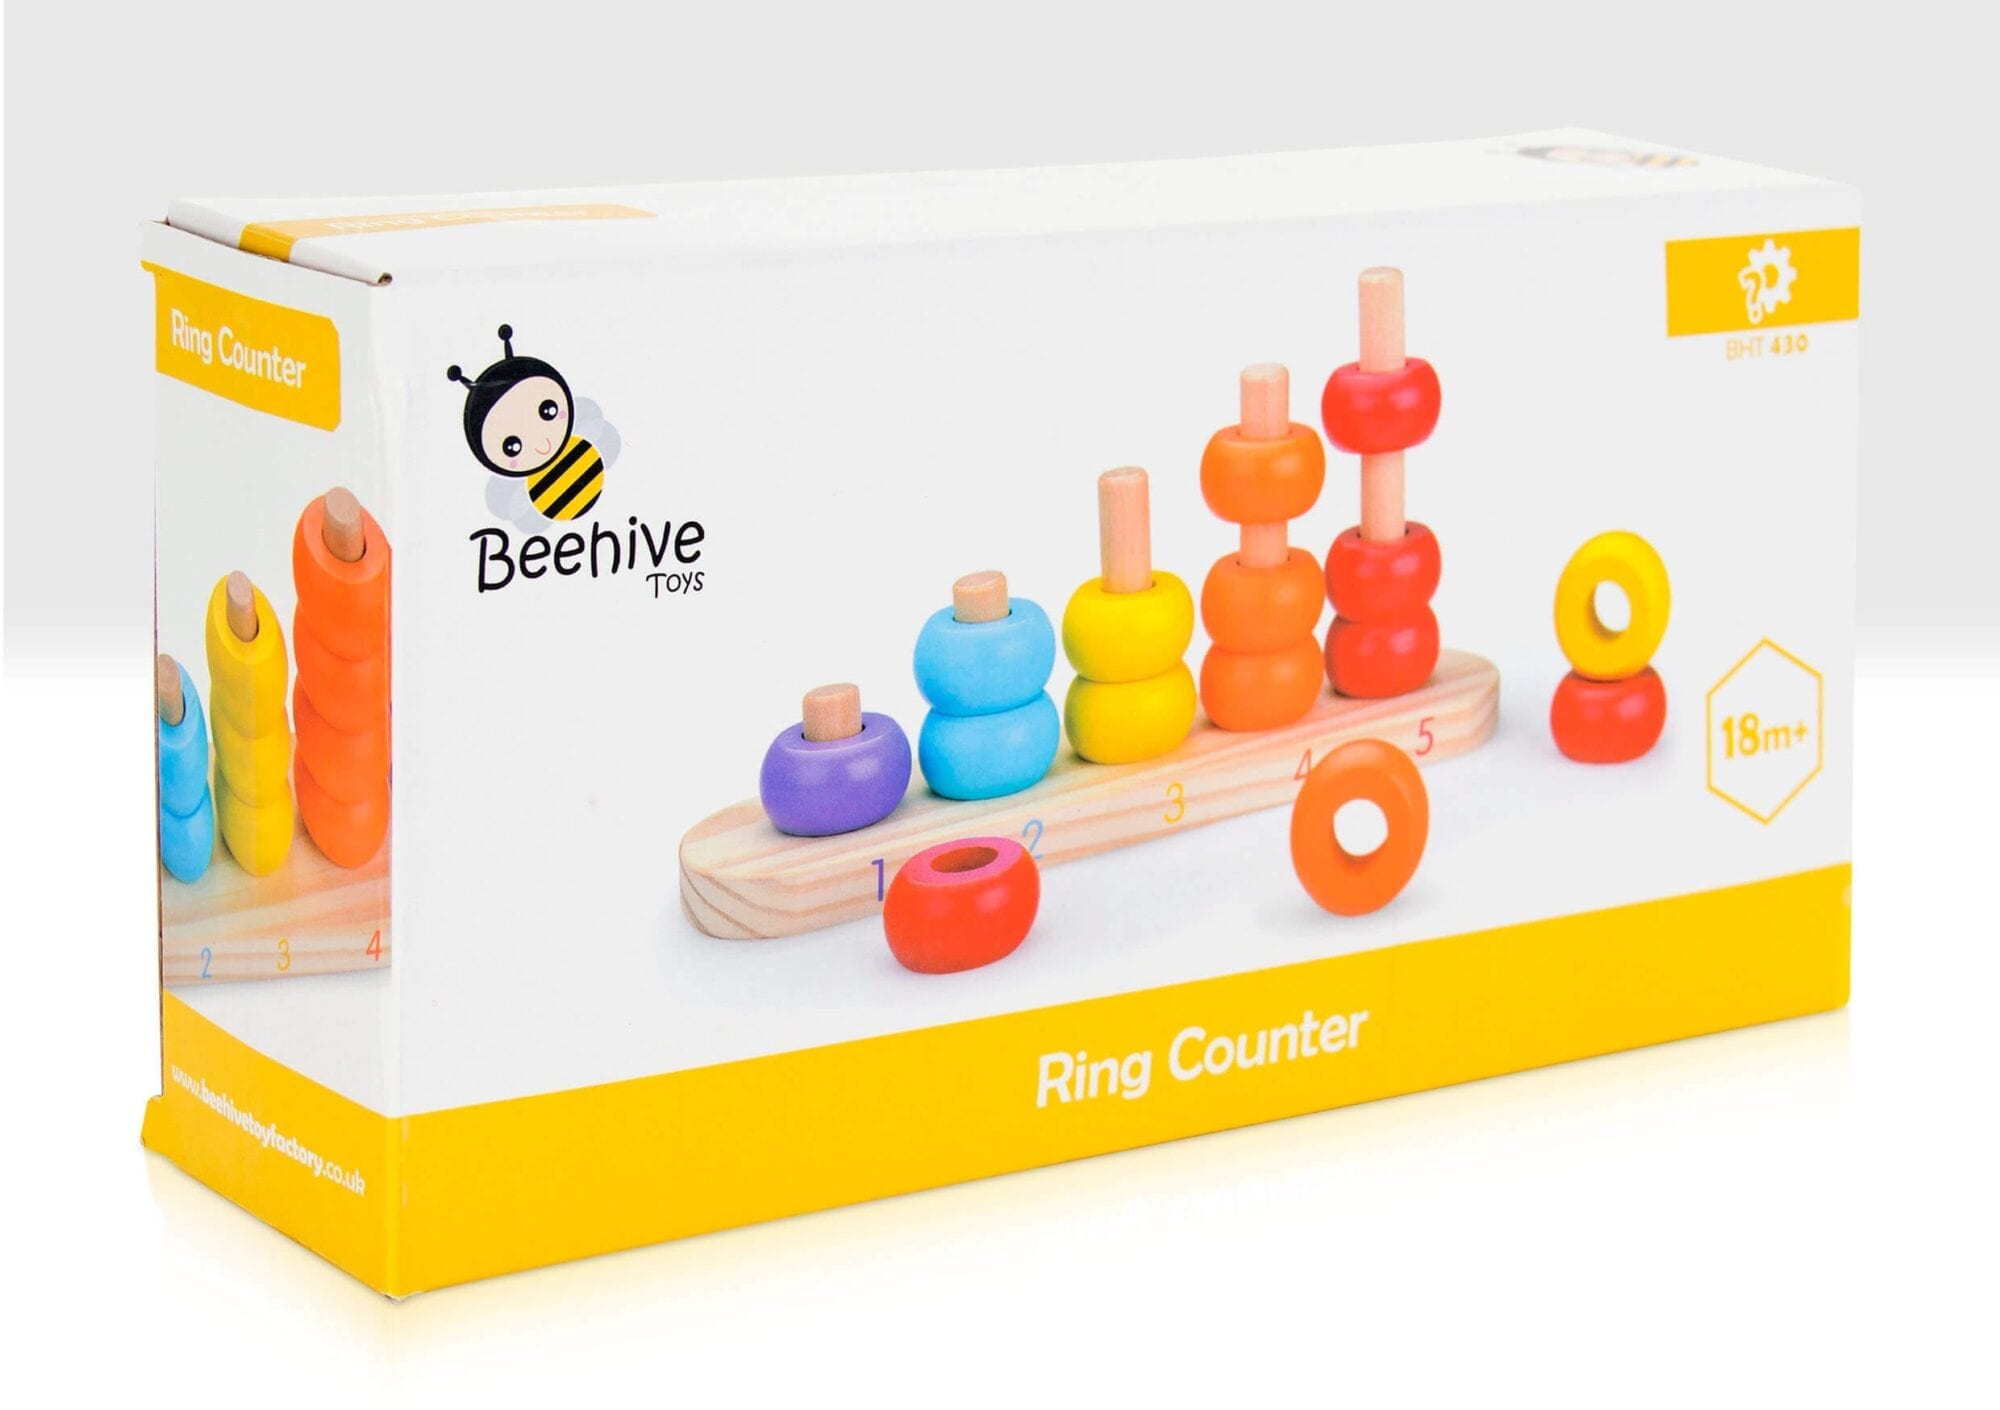 Ring counter in box